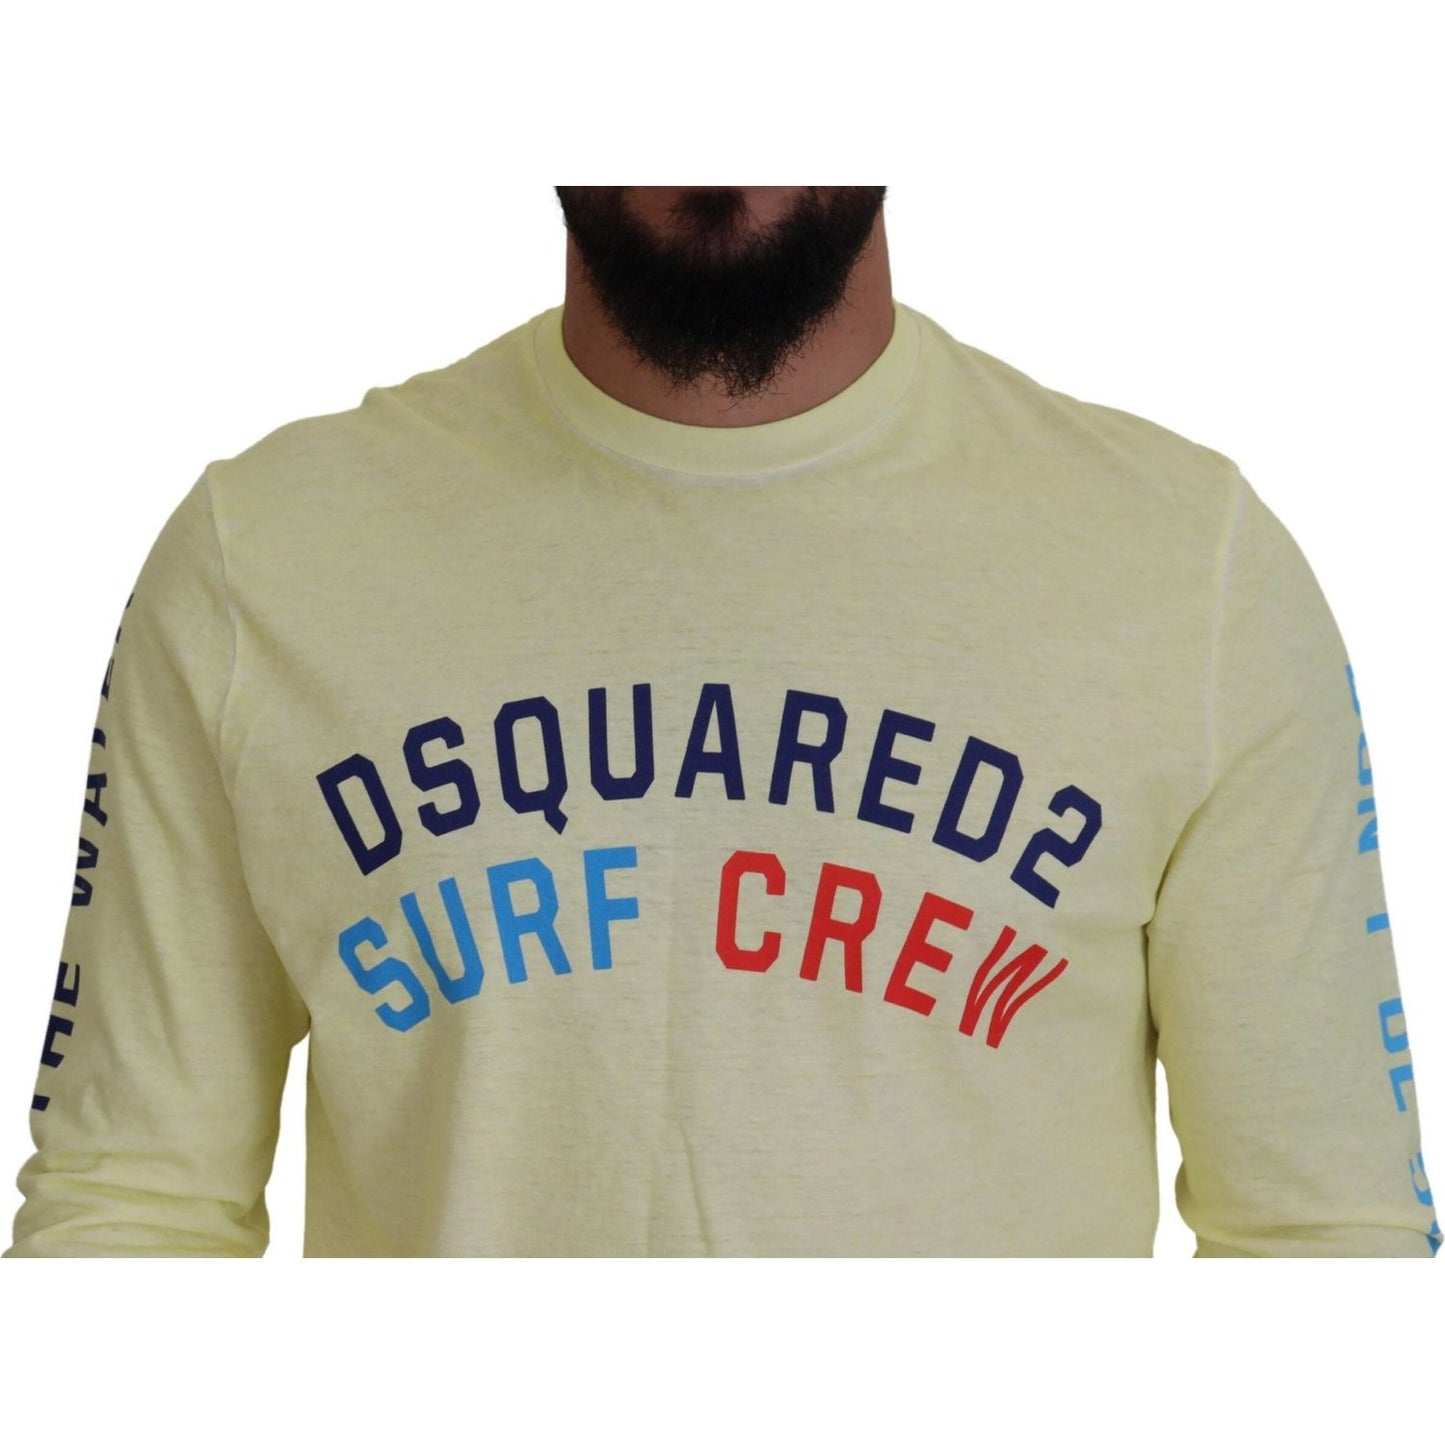 Dsquared² Yellow Colorful Print Long Sleeves Top T-shirt yellow-colorful-print-long-sleeves-top-t-shirt